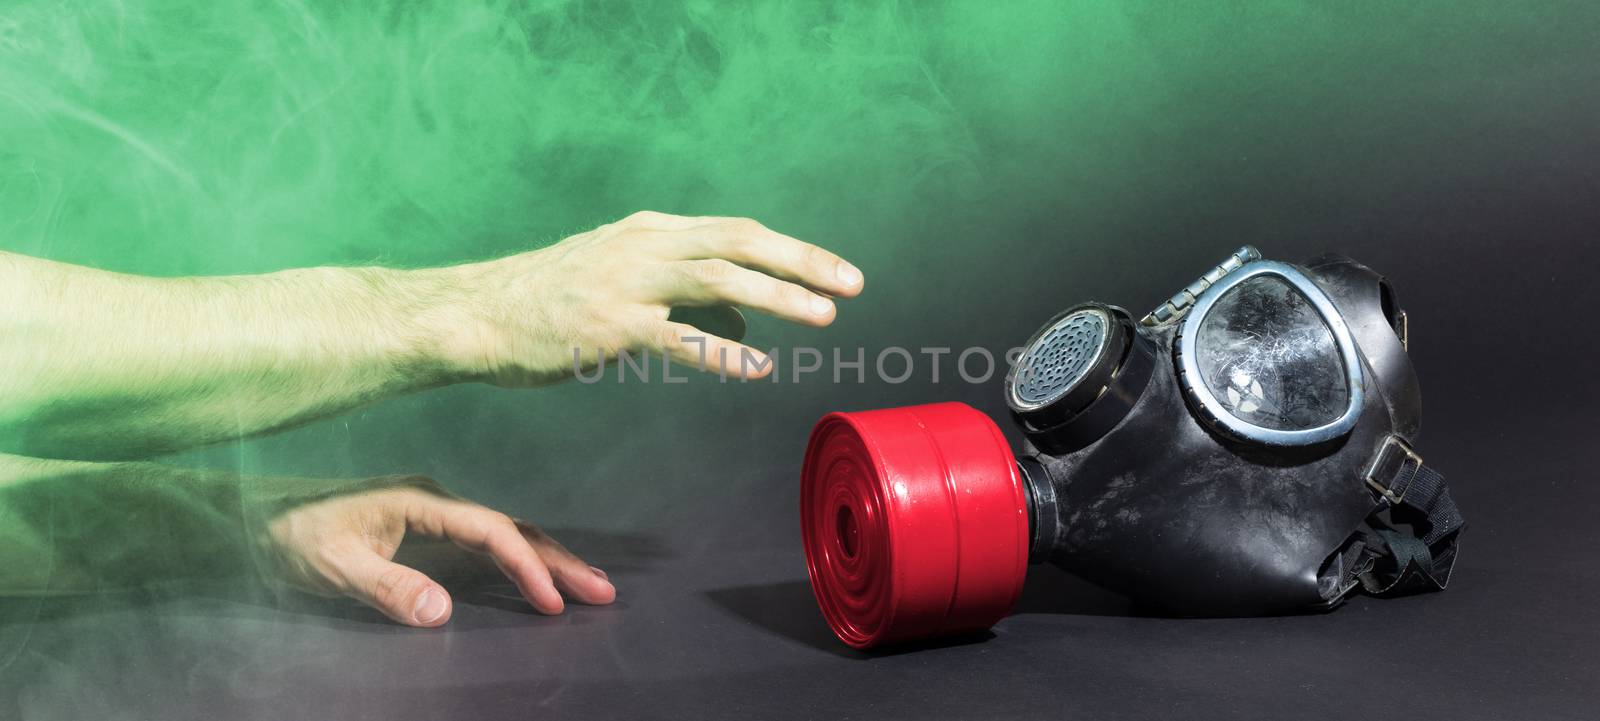 Man in room filled with smoke, trying to reach for vintage gasmask - Isolated on black - Green smoke